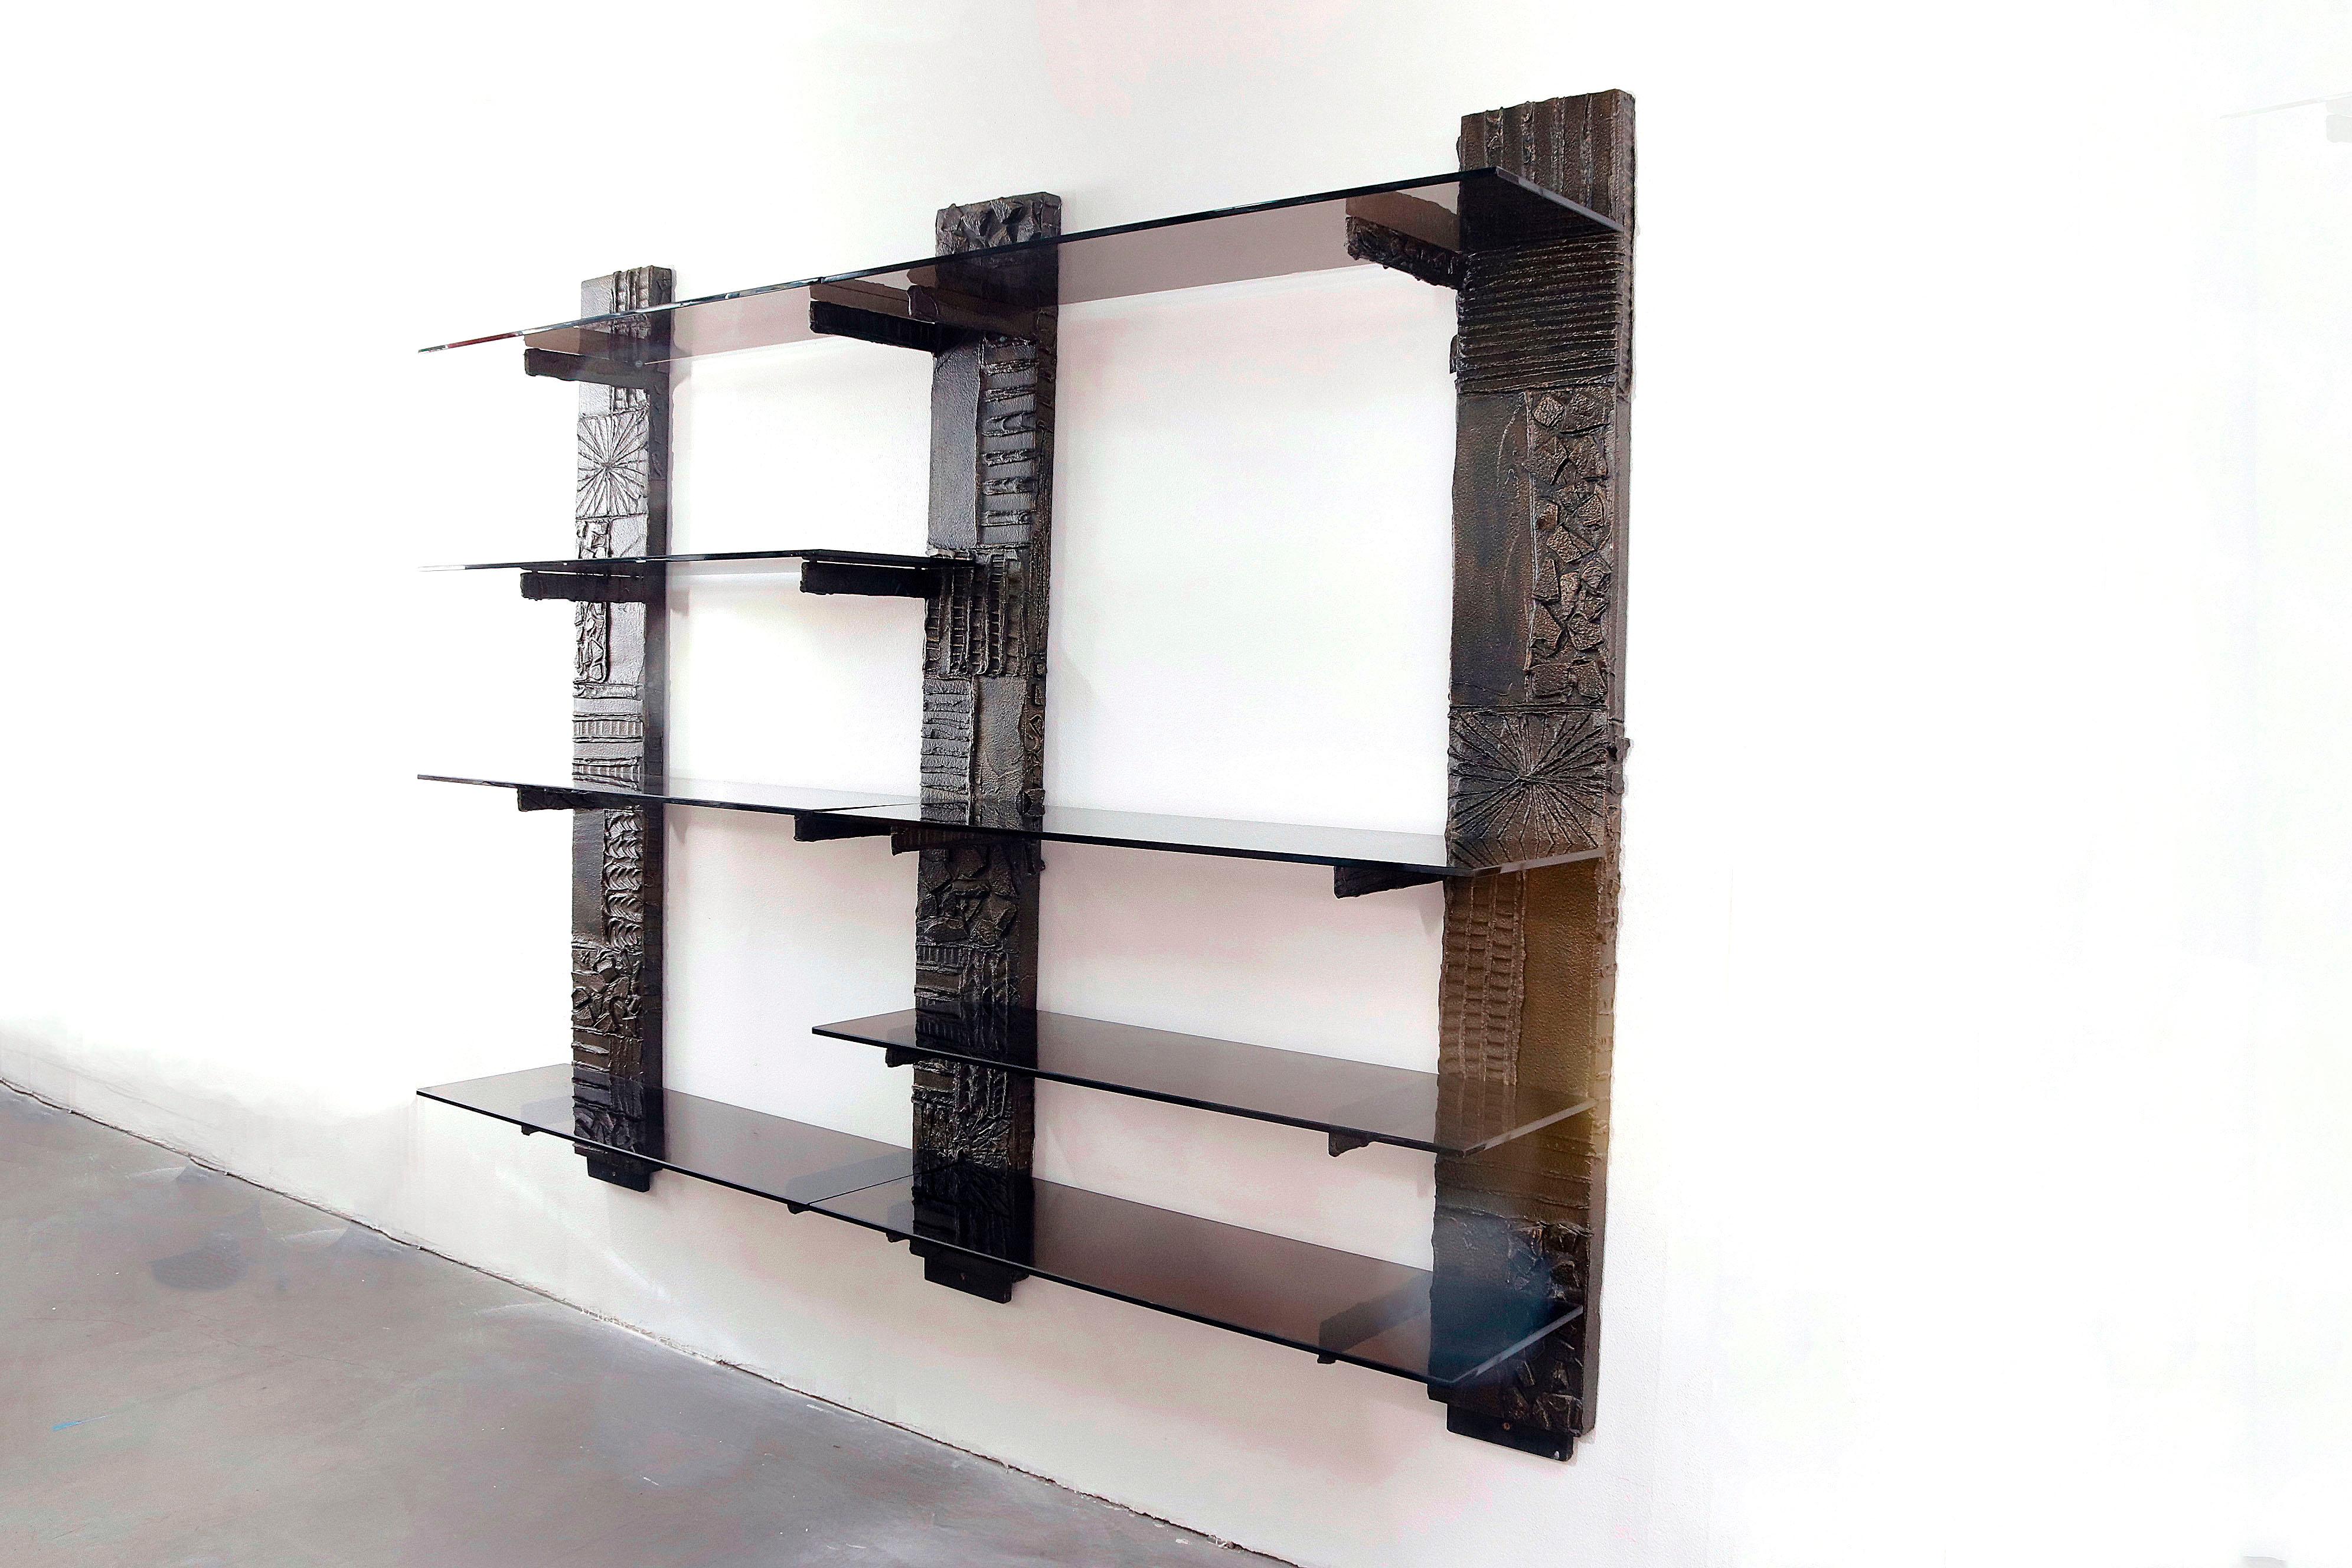 Brutalist wall unit by Paul Evans Studio for Directional USA, 1970's. Bronzed resin over wood with 8 smoked glass shelves. Signed PE 73. Each shelf is 48